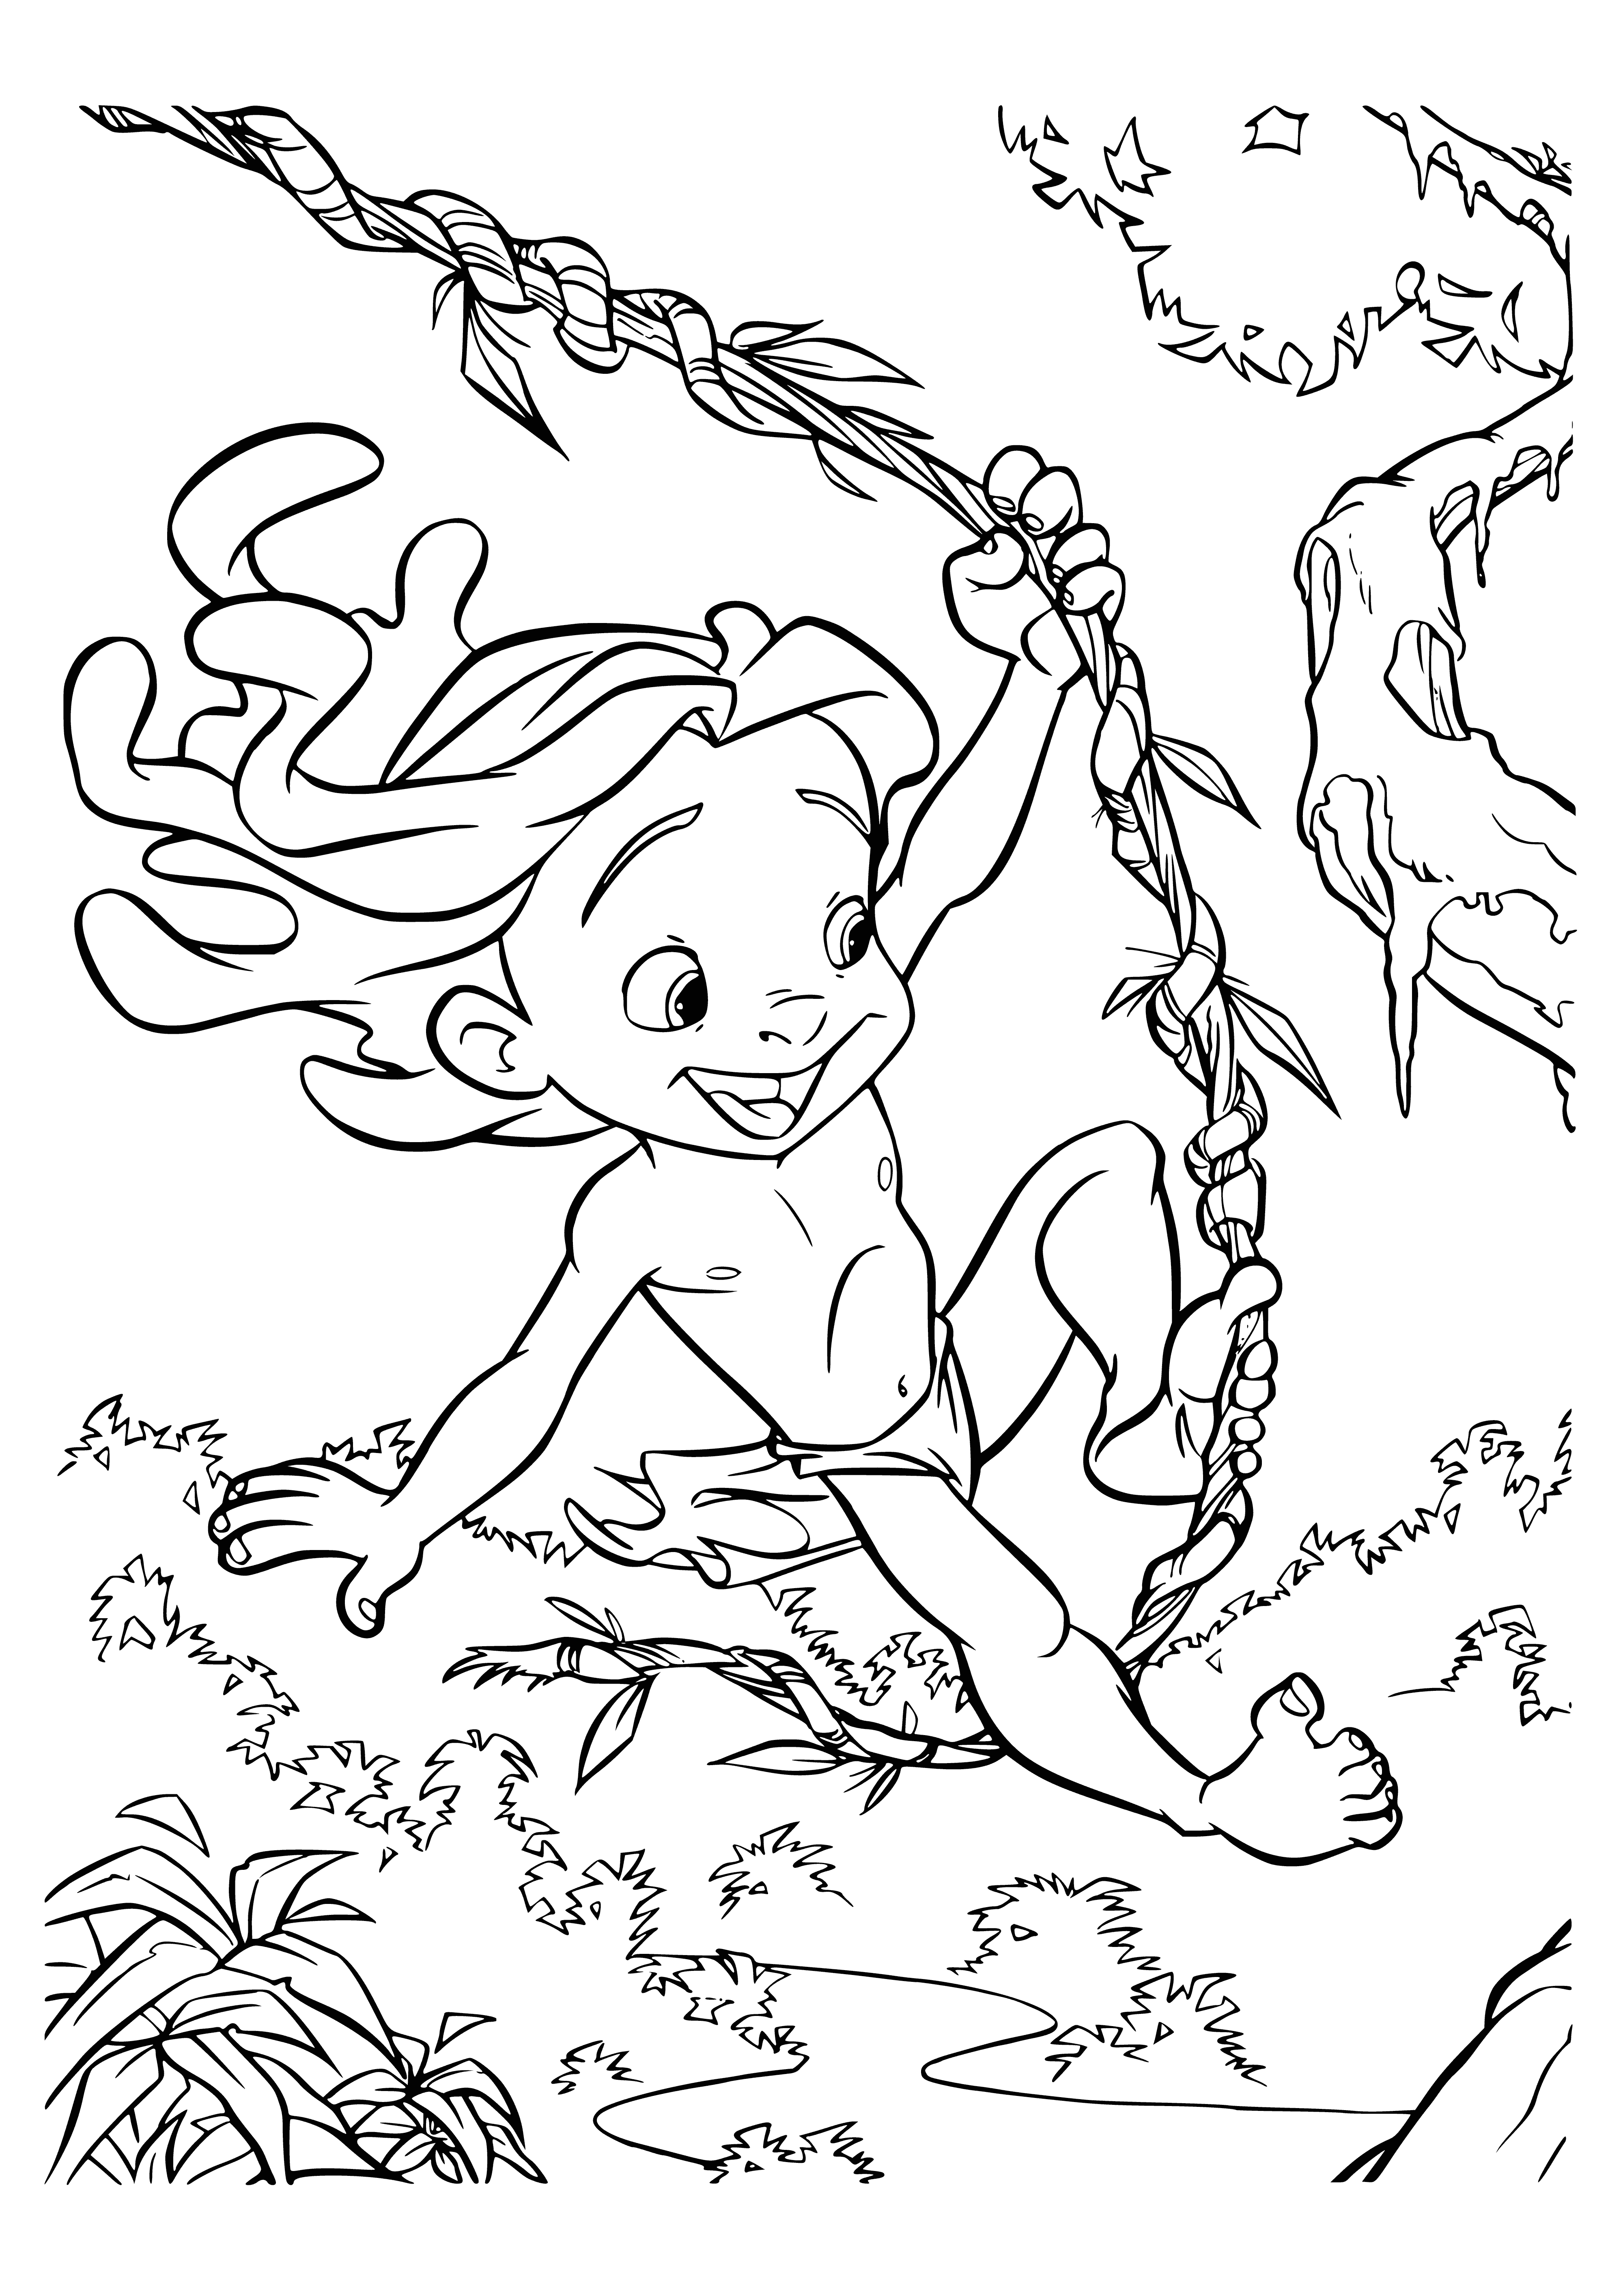 coloring page: Tarzan is depicted swinging on a vine with a toned, muscular physique, blond hair flowing in the wind, and a carefree smile.